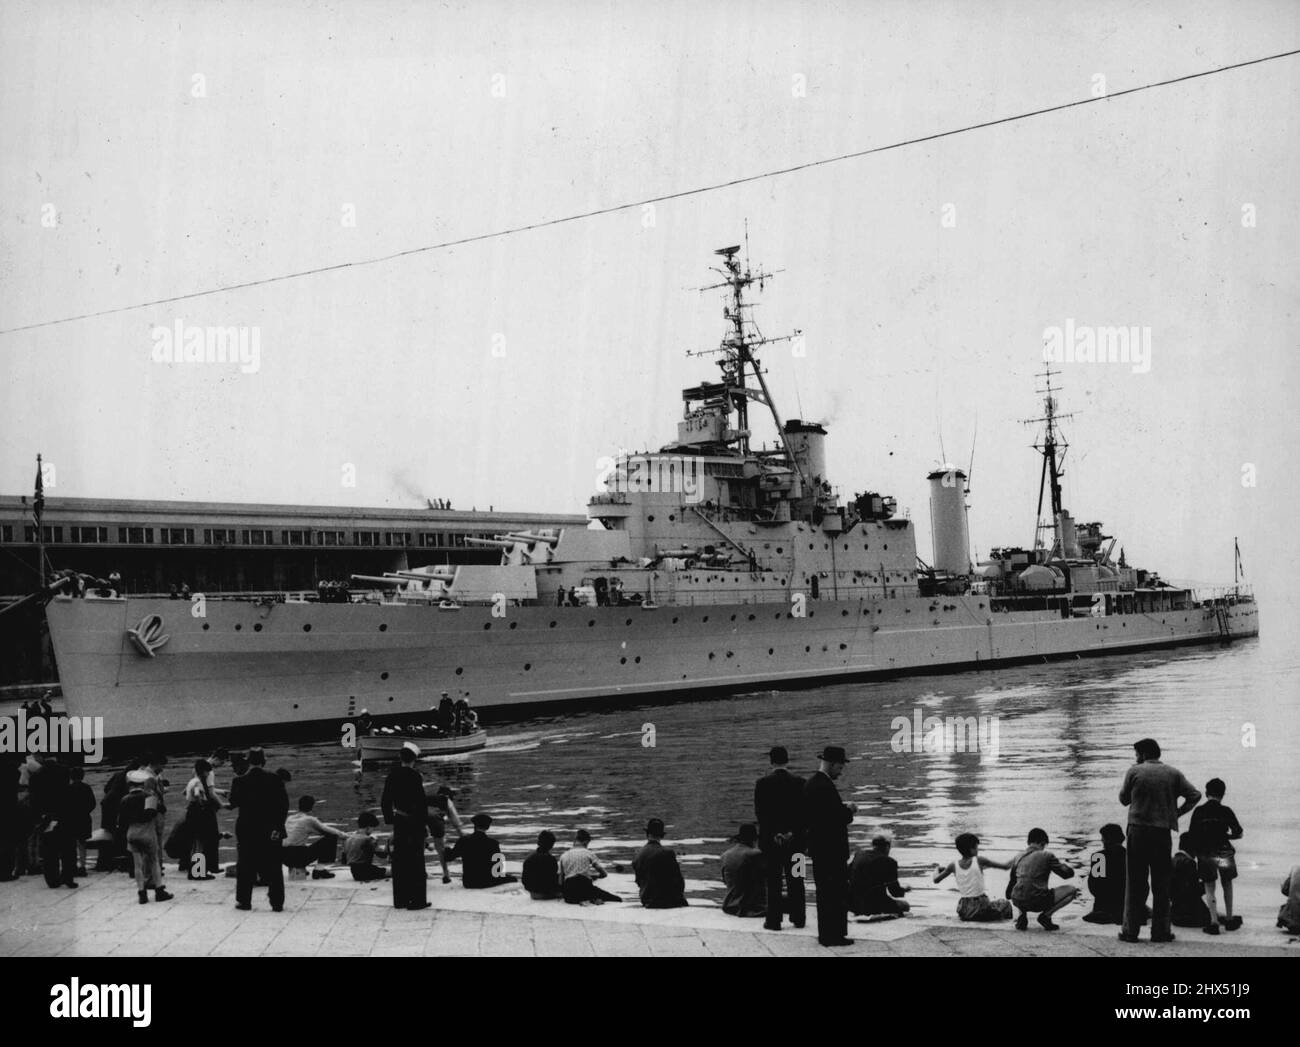 'Mauritius' Ordered To Vicinity Of Abadan -- A stock picture of the cruiser 'Mauritius' seen in Trieste Harbor, May, 1947.Britain has ordered the cruiser 'Mauritius' to 'Proceed forthwith' to the vicinity of Abadan, the oil port of troubled Iran.Foreign secretary, Herbert Morrison, disclosing this today June 26, in the house of commons, said the Anglo-Iranian company at the same time has ordered all its tankers to leave Abadan immediately.The company acted in view of a deadlock with the Persian authorities over the terms for tankers to leave with cargoes of oil. June 26, 1951. (Photo by Associ Stock Photo